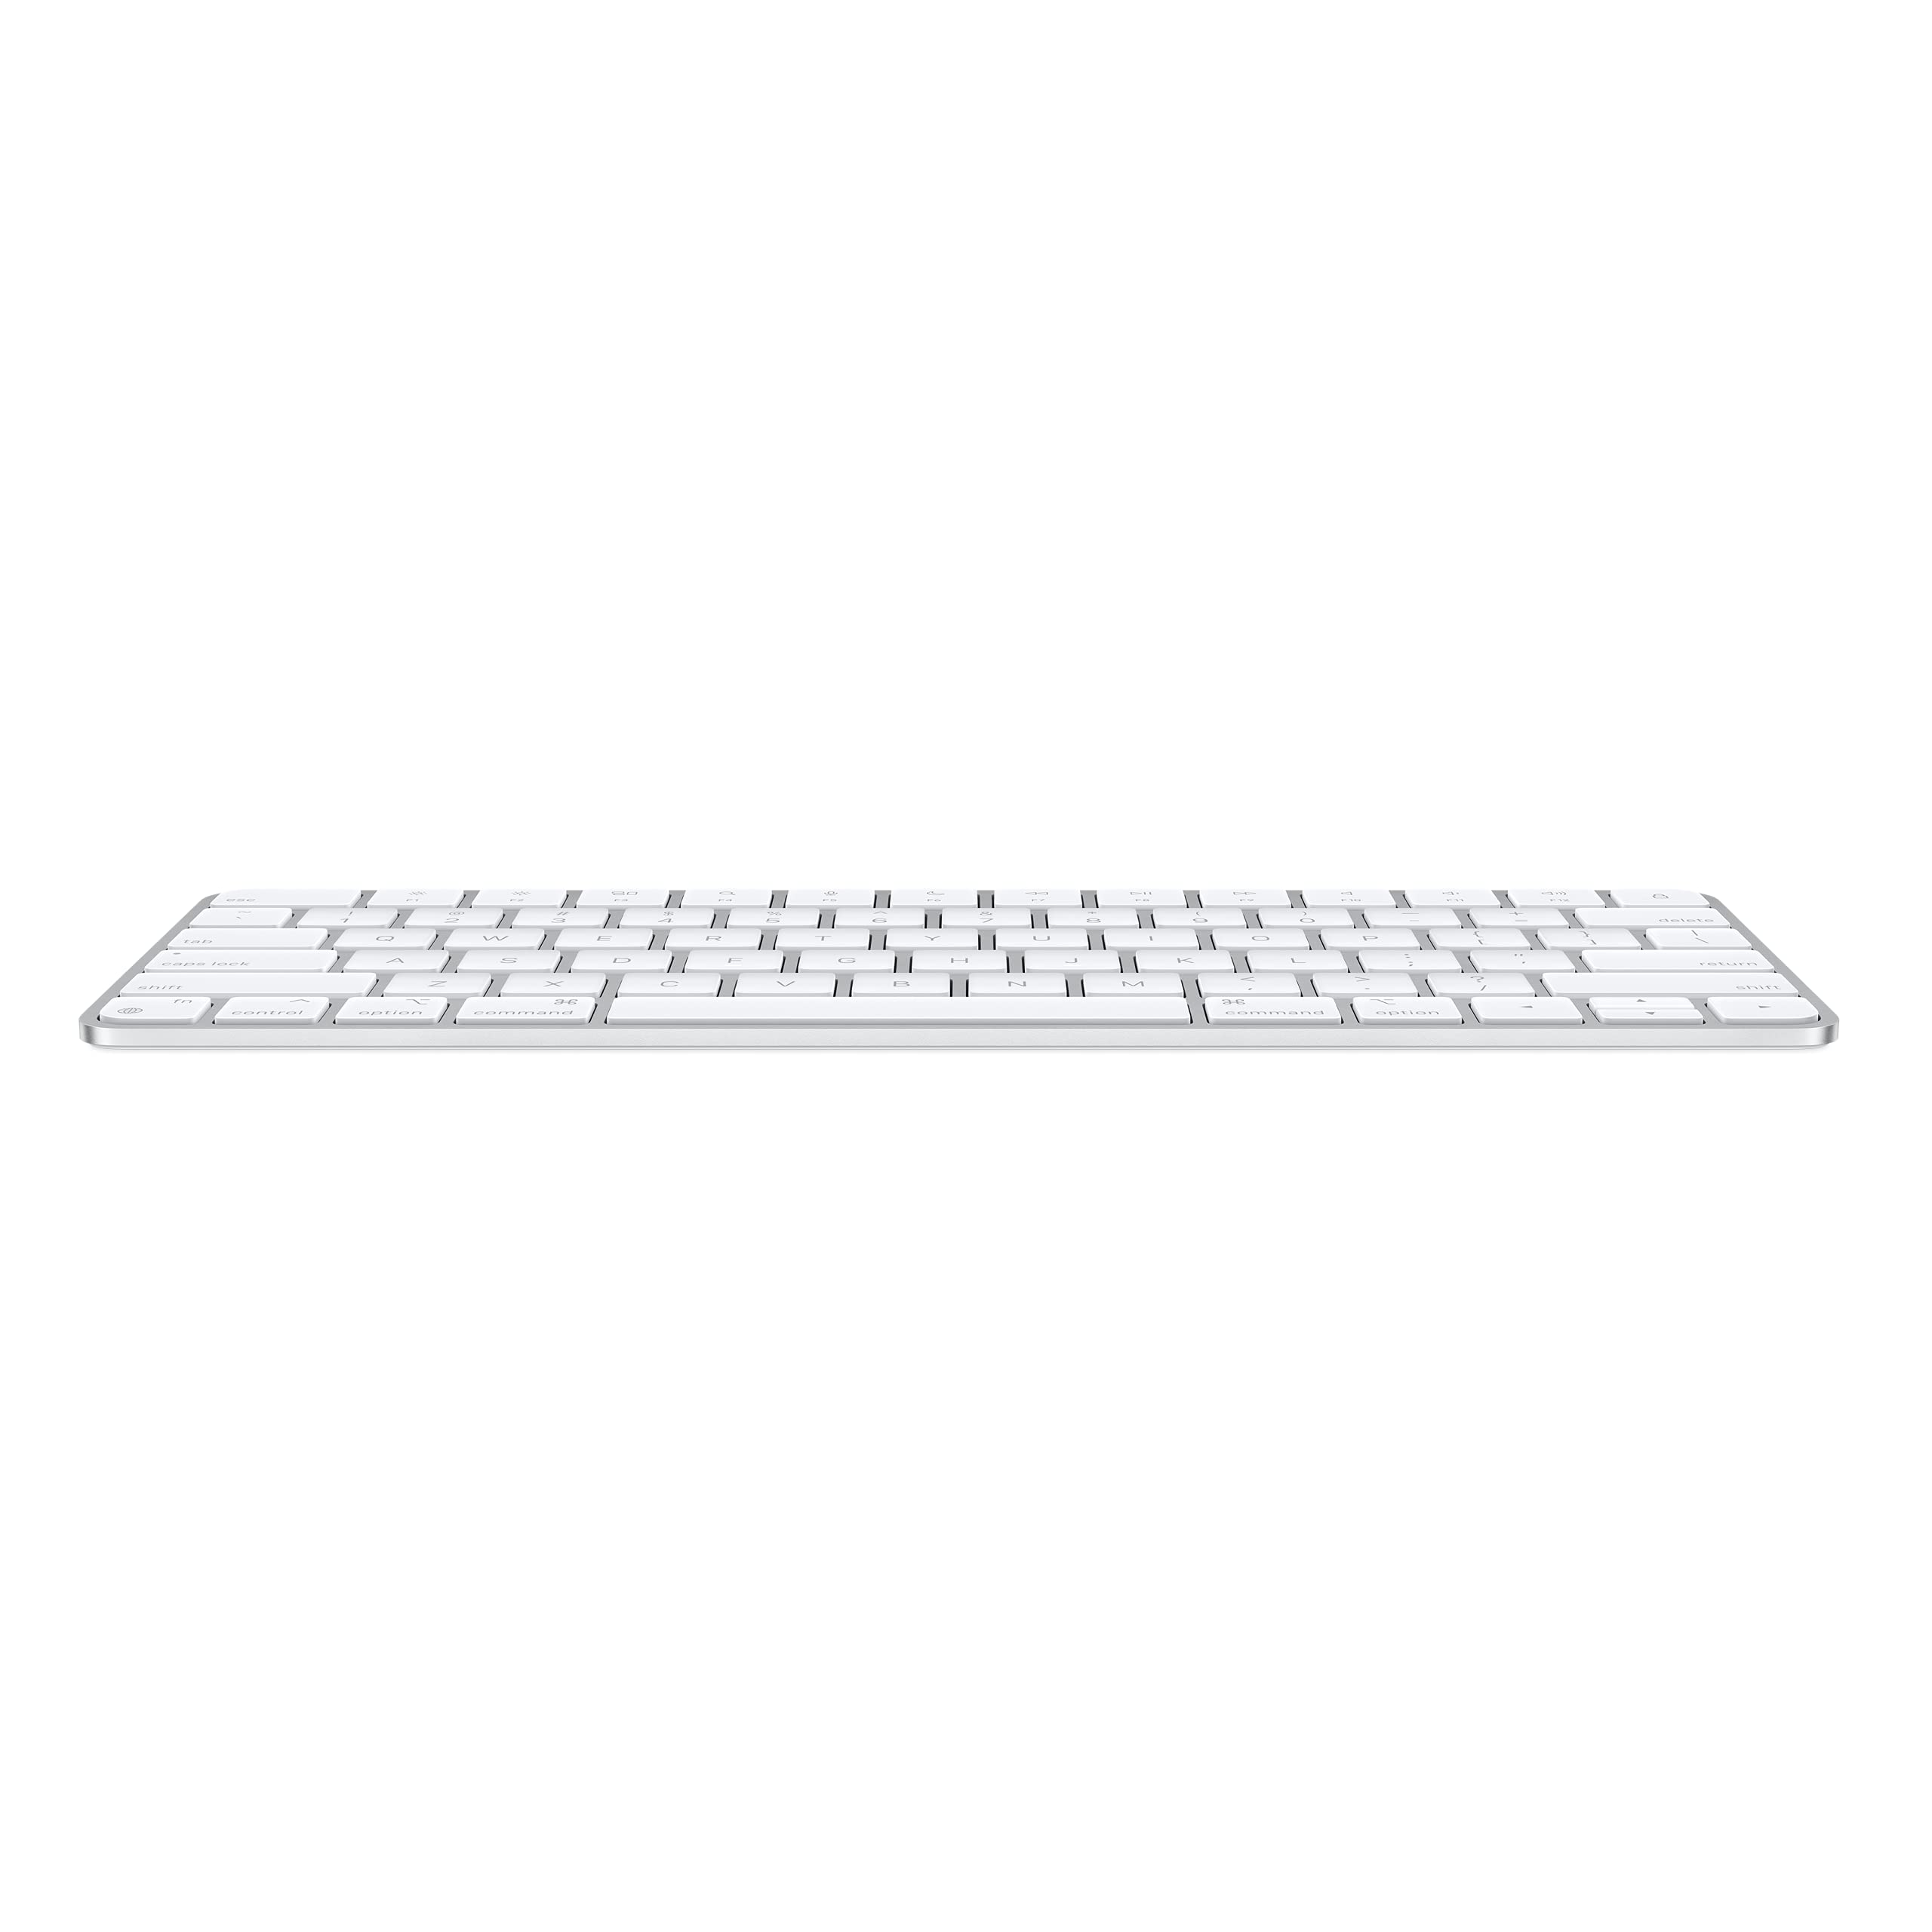 Apple Magic Keyboard: Wireless, Bluetooth, Rechargeable. Works with Mac, iPad, or iPhone; US English - White